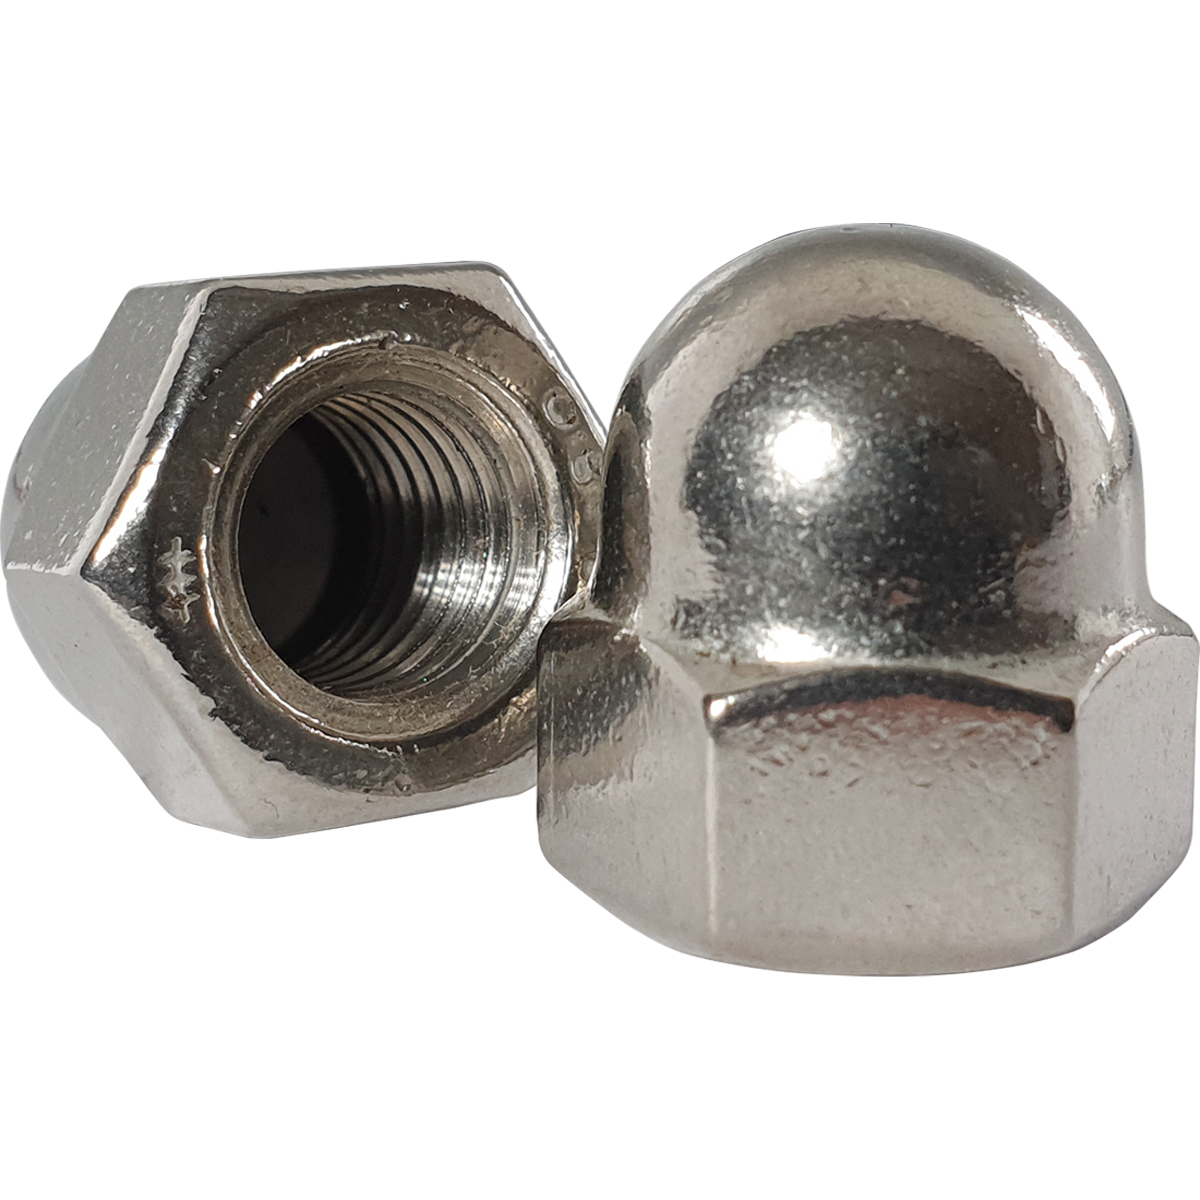 Dome head nuts are also known as dome nuts, capped nuts, or acorn nuts, with a great range available at Fusion Fixings.